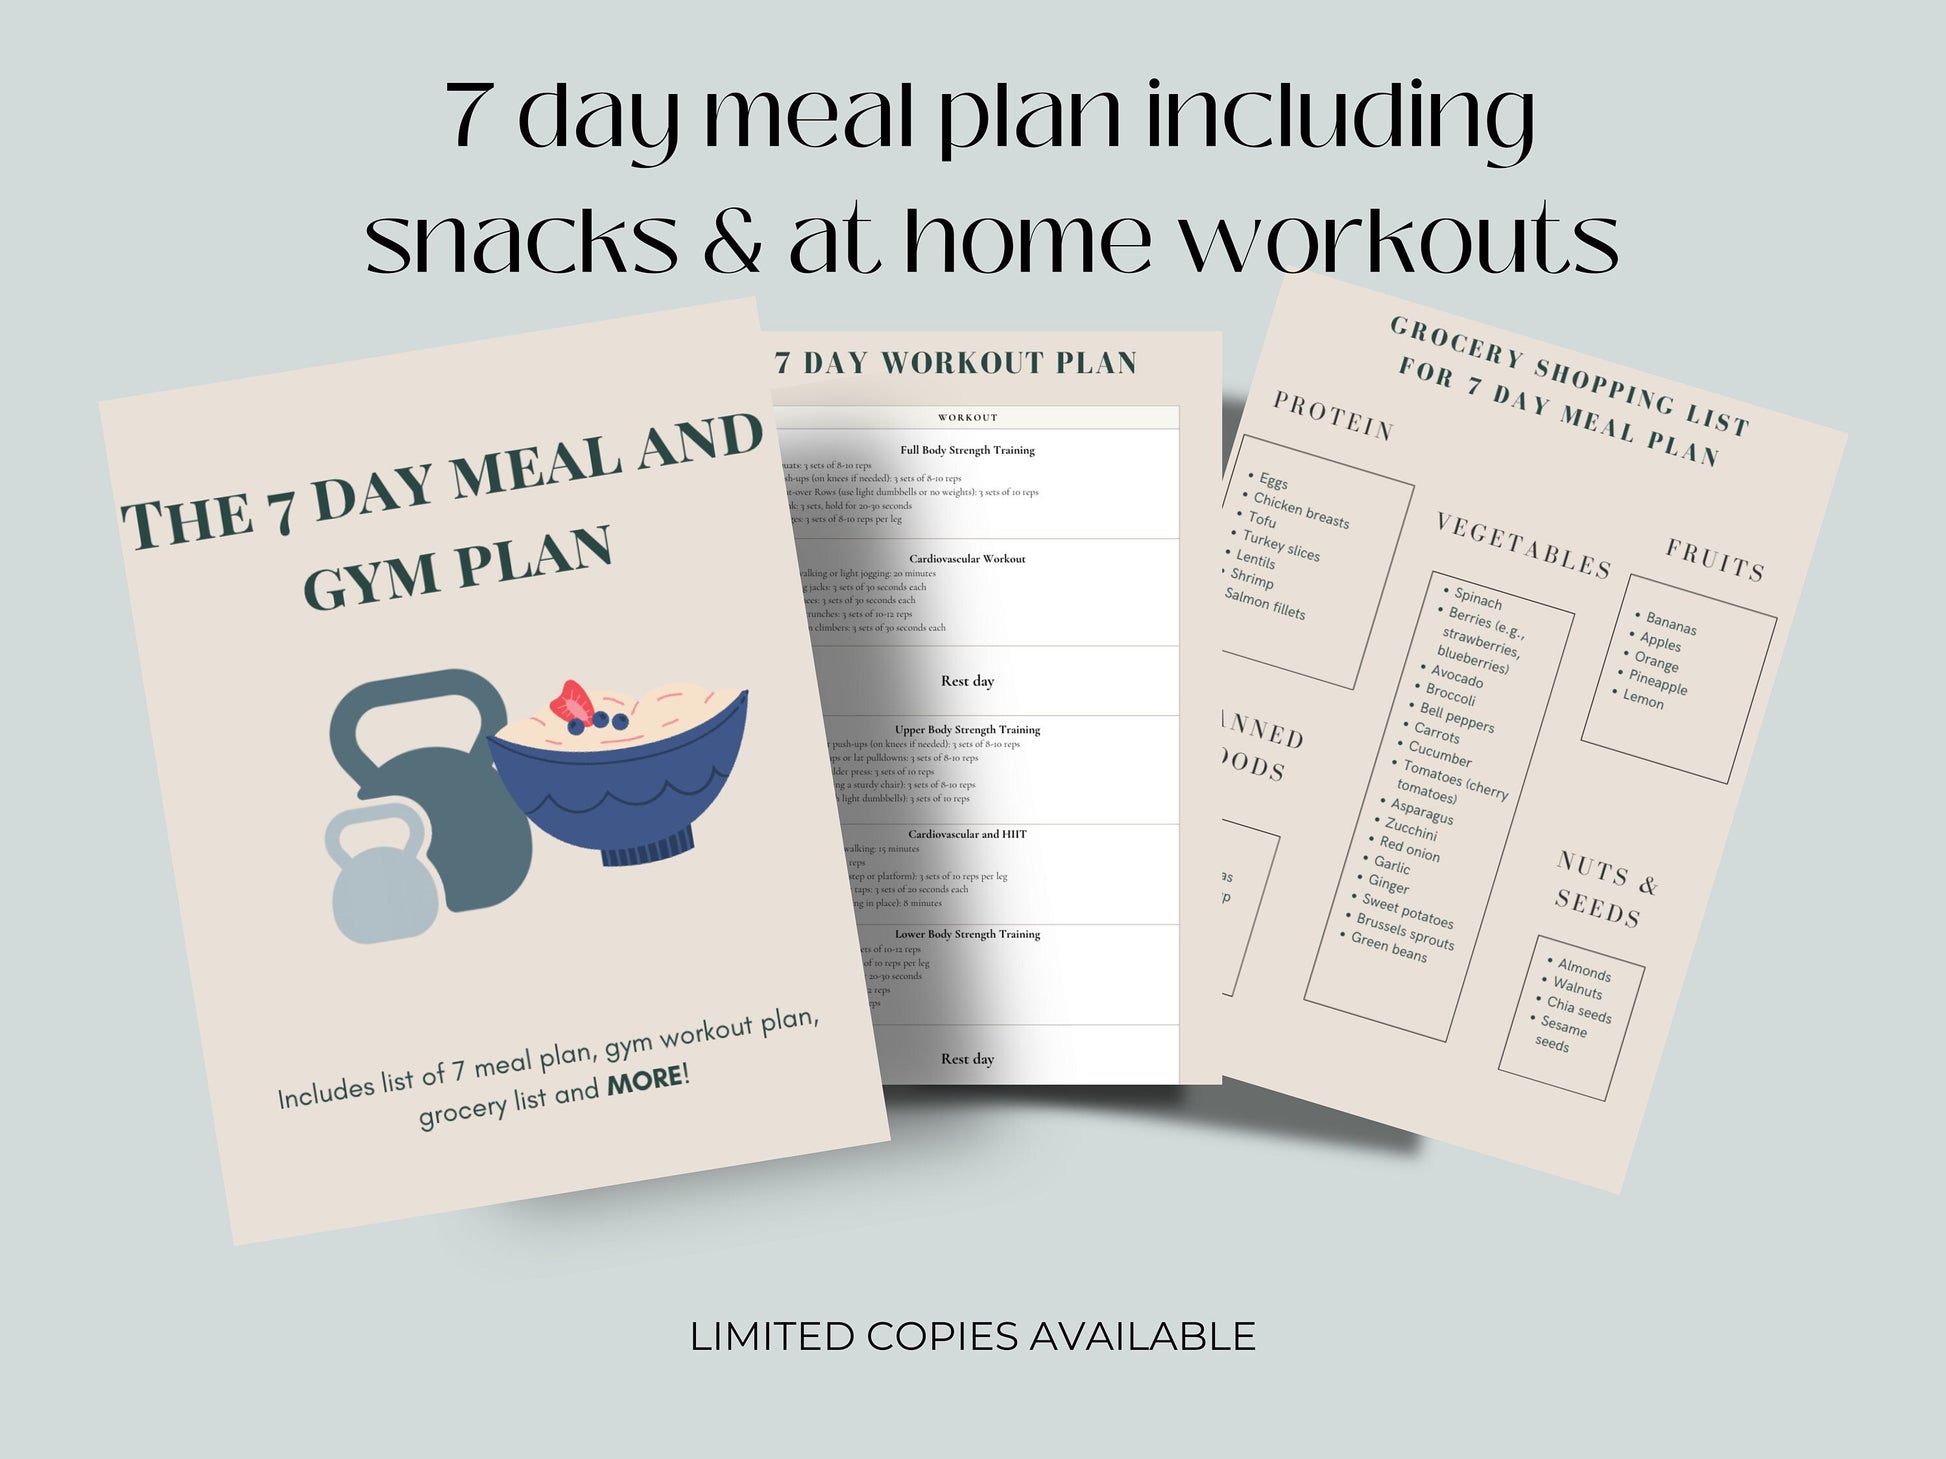 weekly meal plan, plan, workout. Fitness gym plan, workout planner, meal plans, meal planning, meal planner, prinable, grocery list, weight loss, meal,planner, gym, at home workouts, meal and gym plan for weight loss, 1500 calories meal plan, calorie